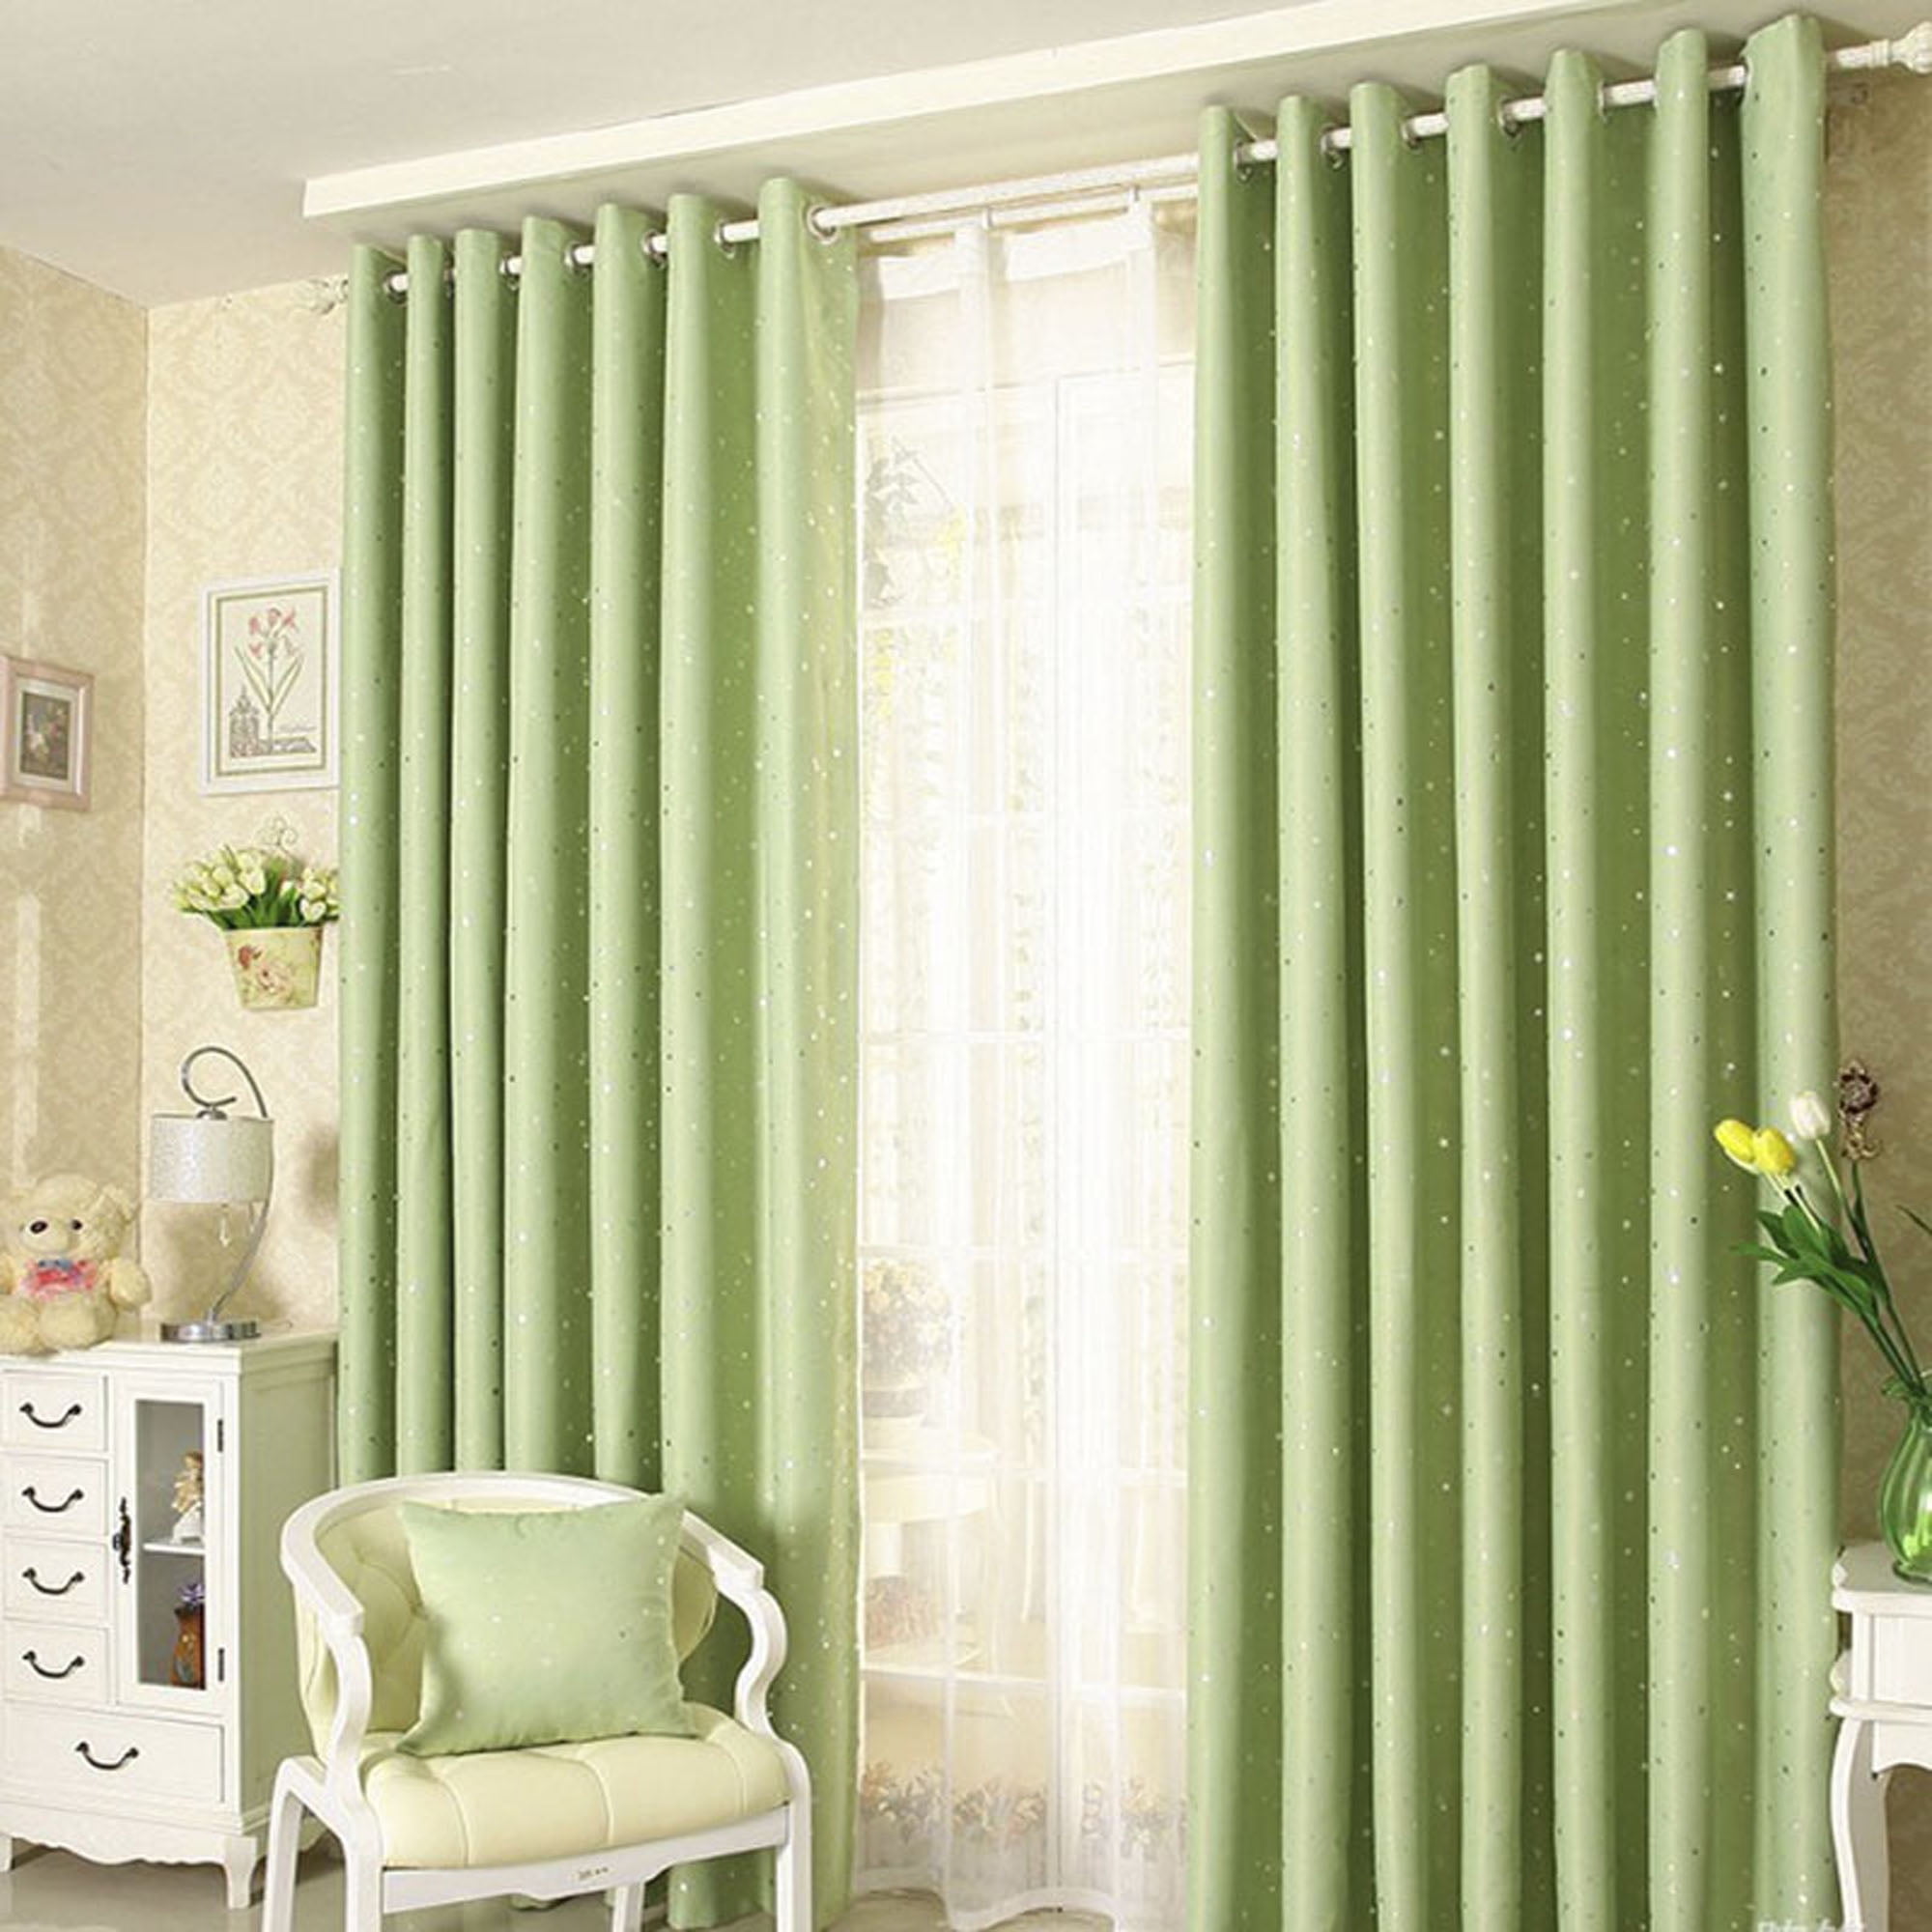 NK HOME Blackout Curtains, Curtains for Bedroom Room Darkening Drapes